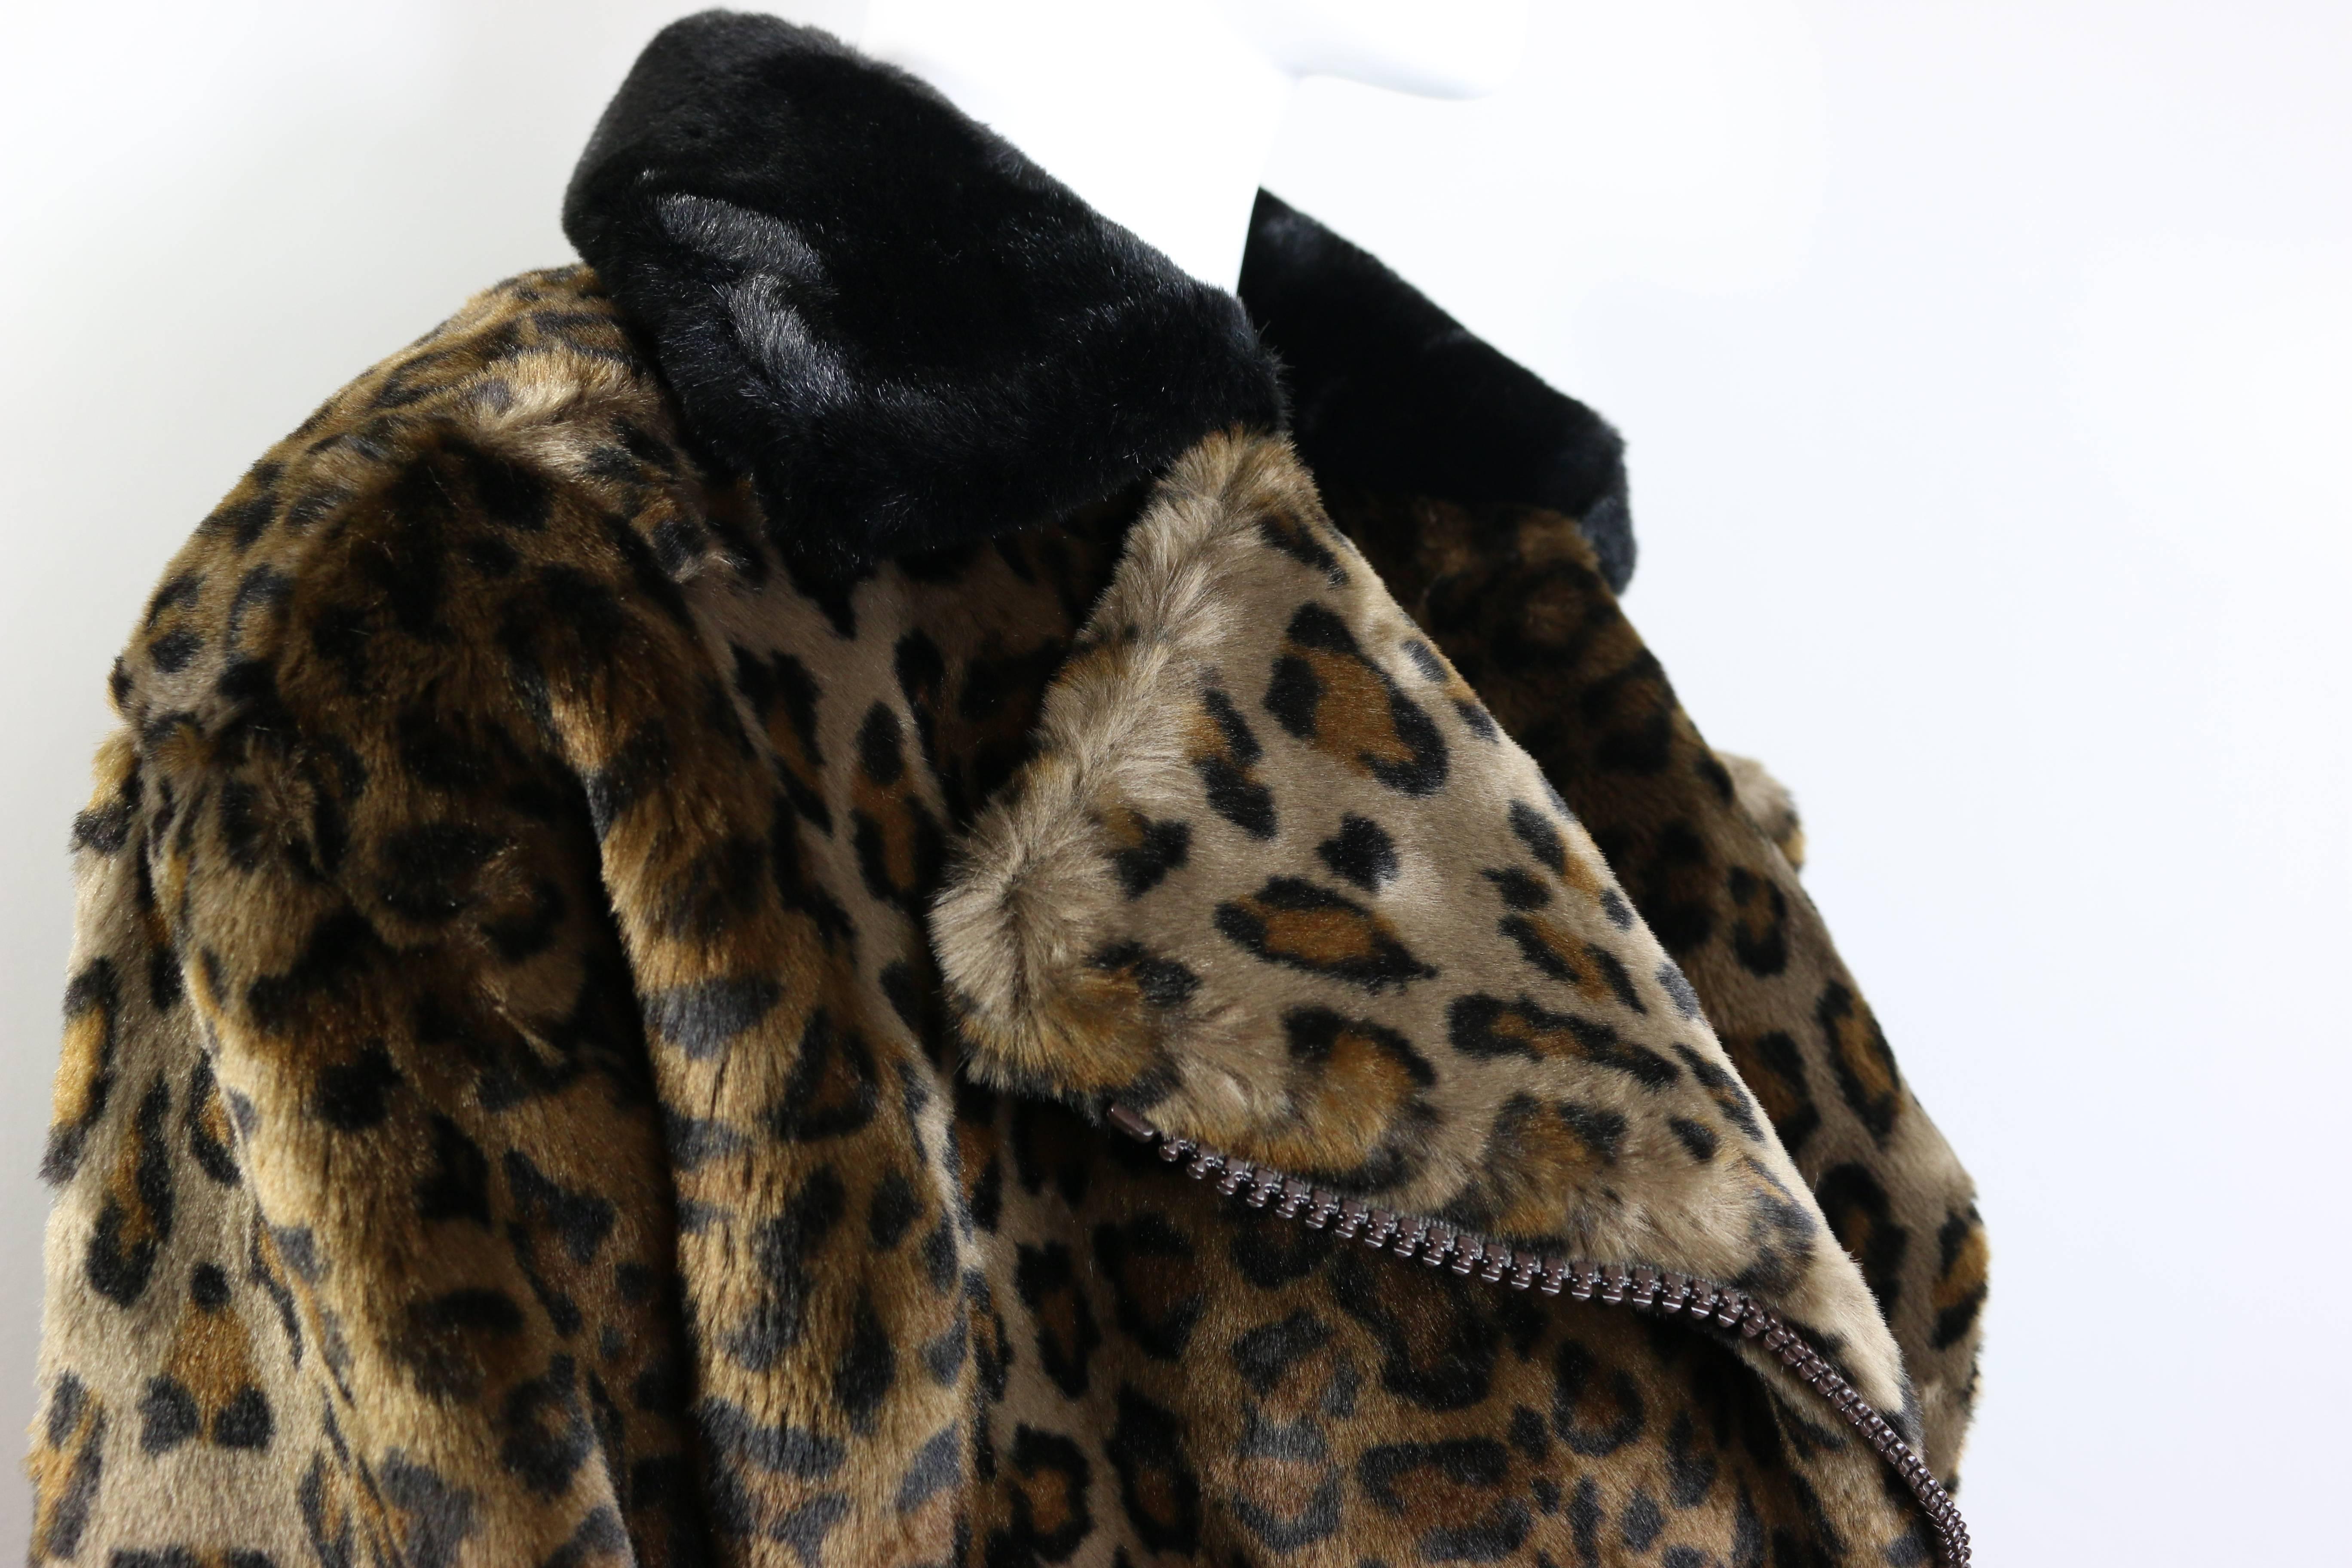 - Vintage 90s Nina Ricci animal leopard-print faux fur coat. 

- Featuring a diagonal zipper on front with black faux fur collar and folder cuffs. 

- 100 % Cotton, Rayon, Acrylic . 

- No size listed but it fits like a size S to M. 

- Height: 60cm